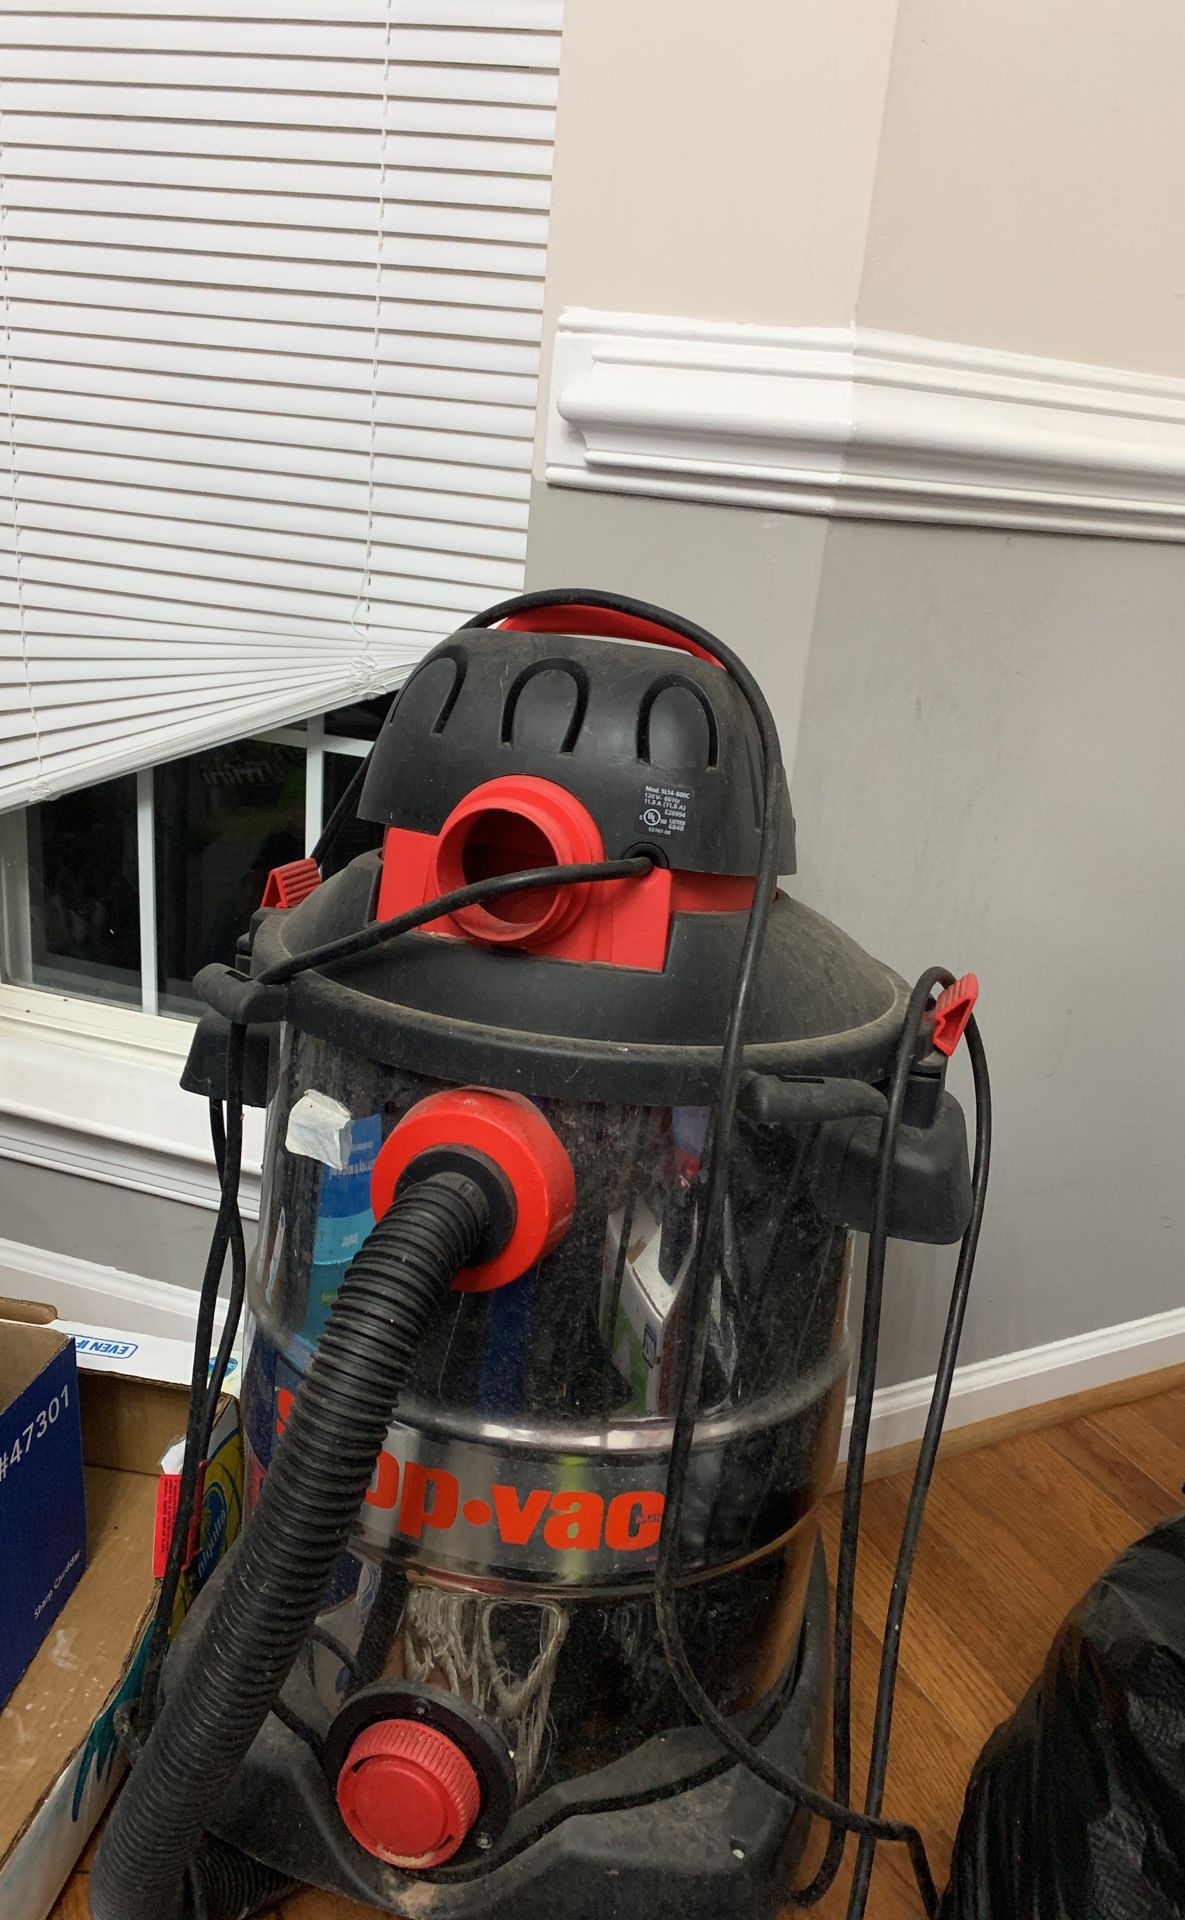 Shop vac priced to sell